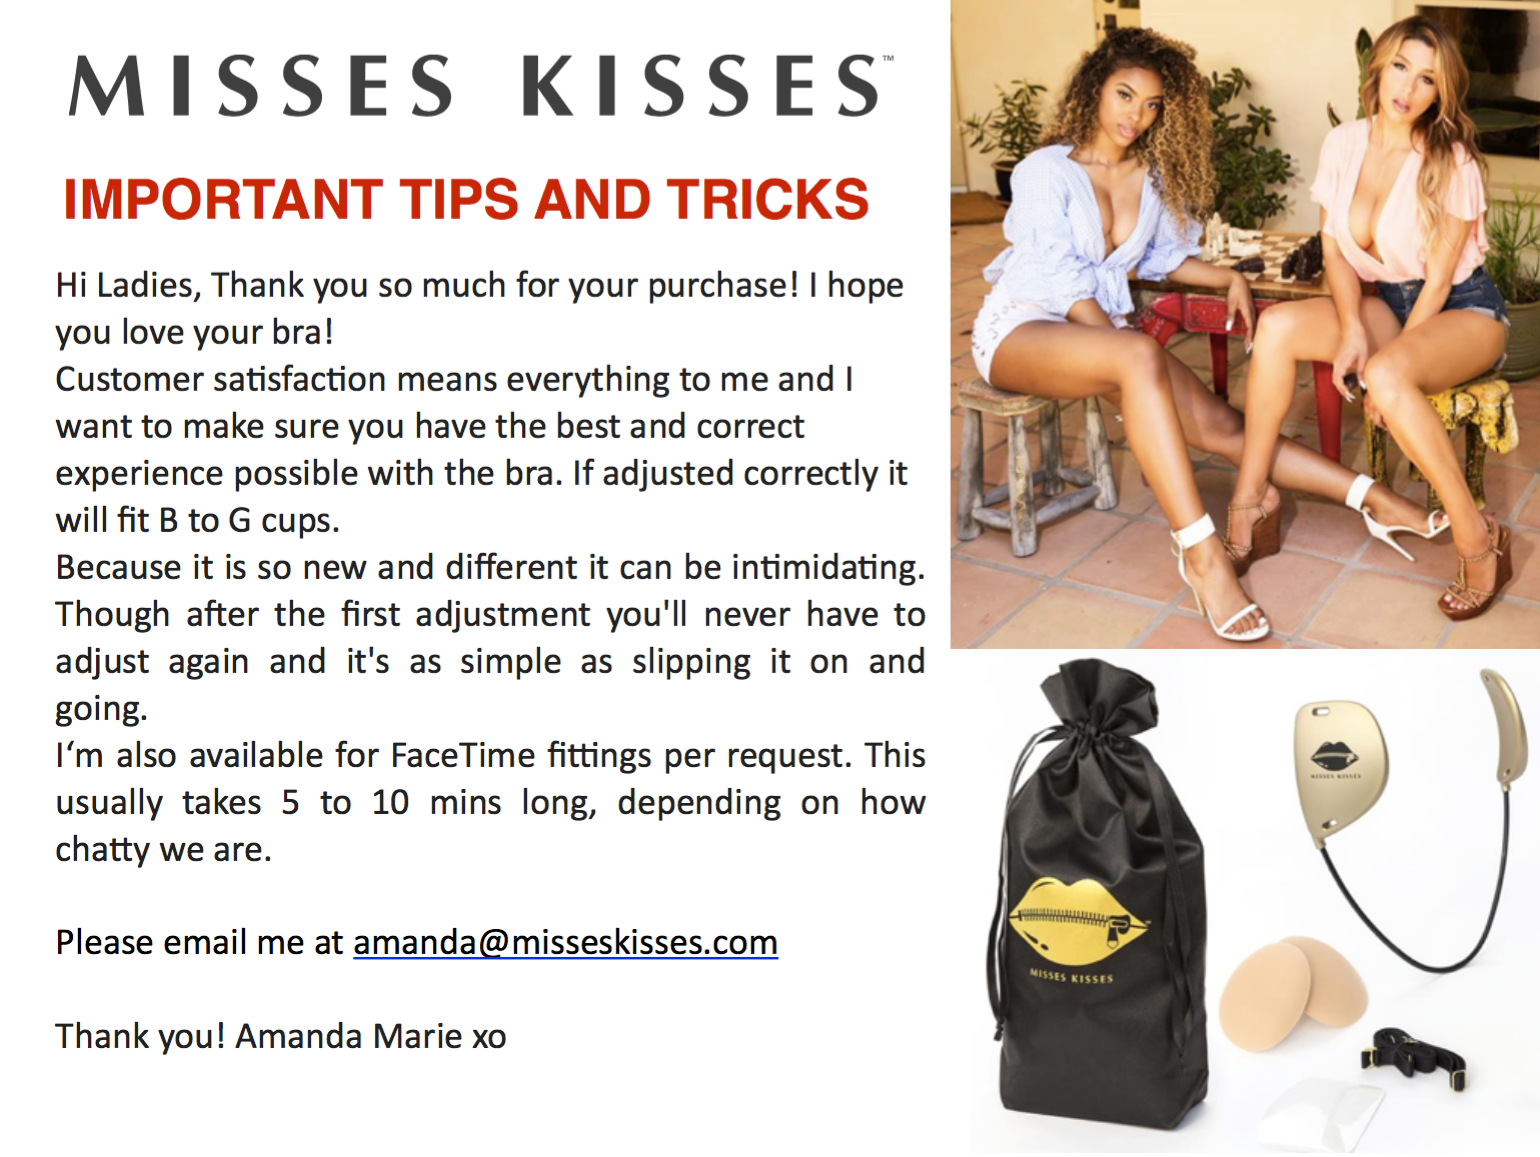 ALL-IN-ONE BRA? The truth about Misses Kisses Bra